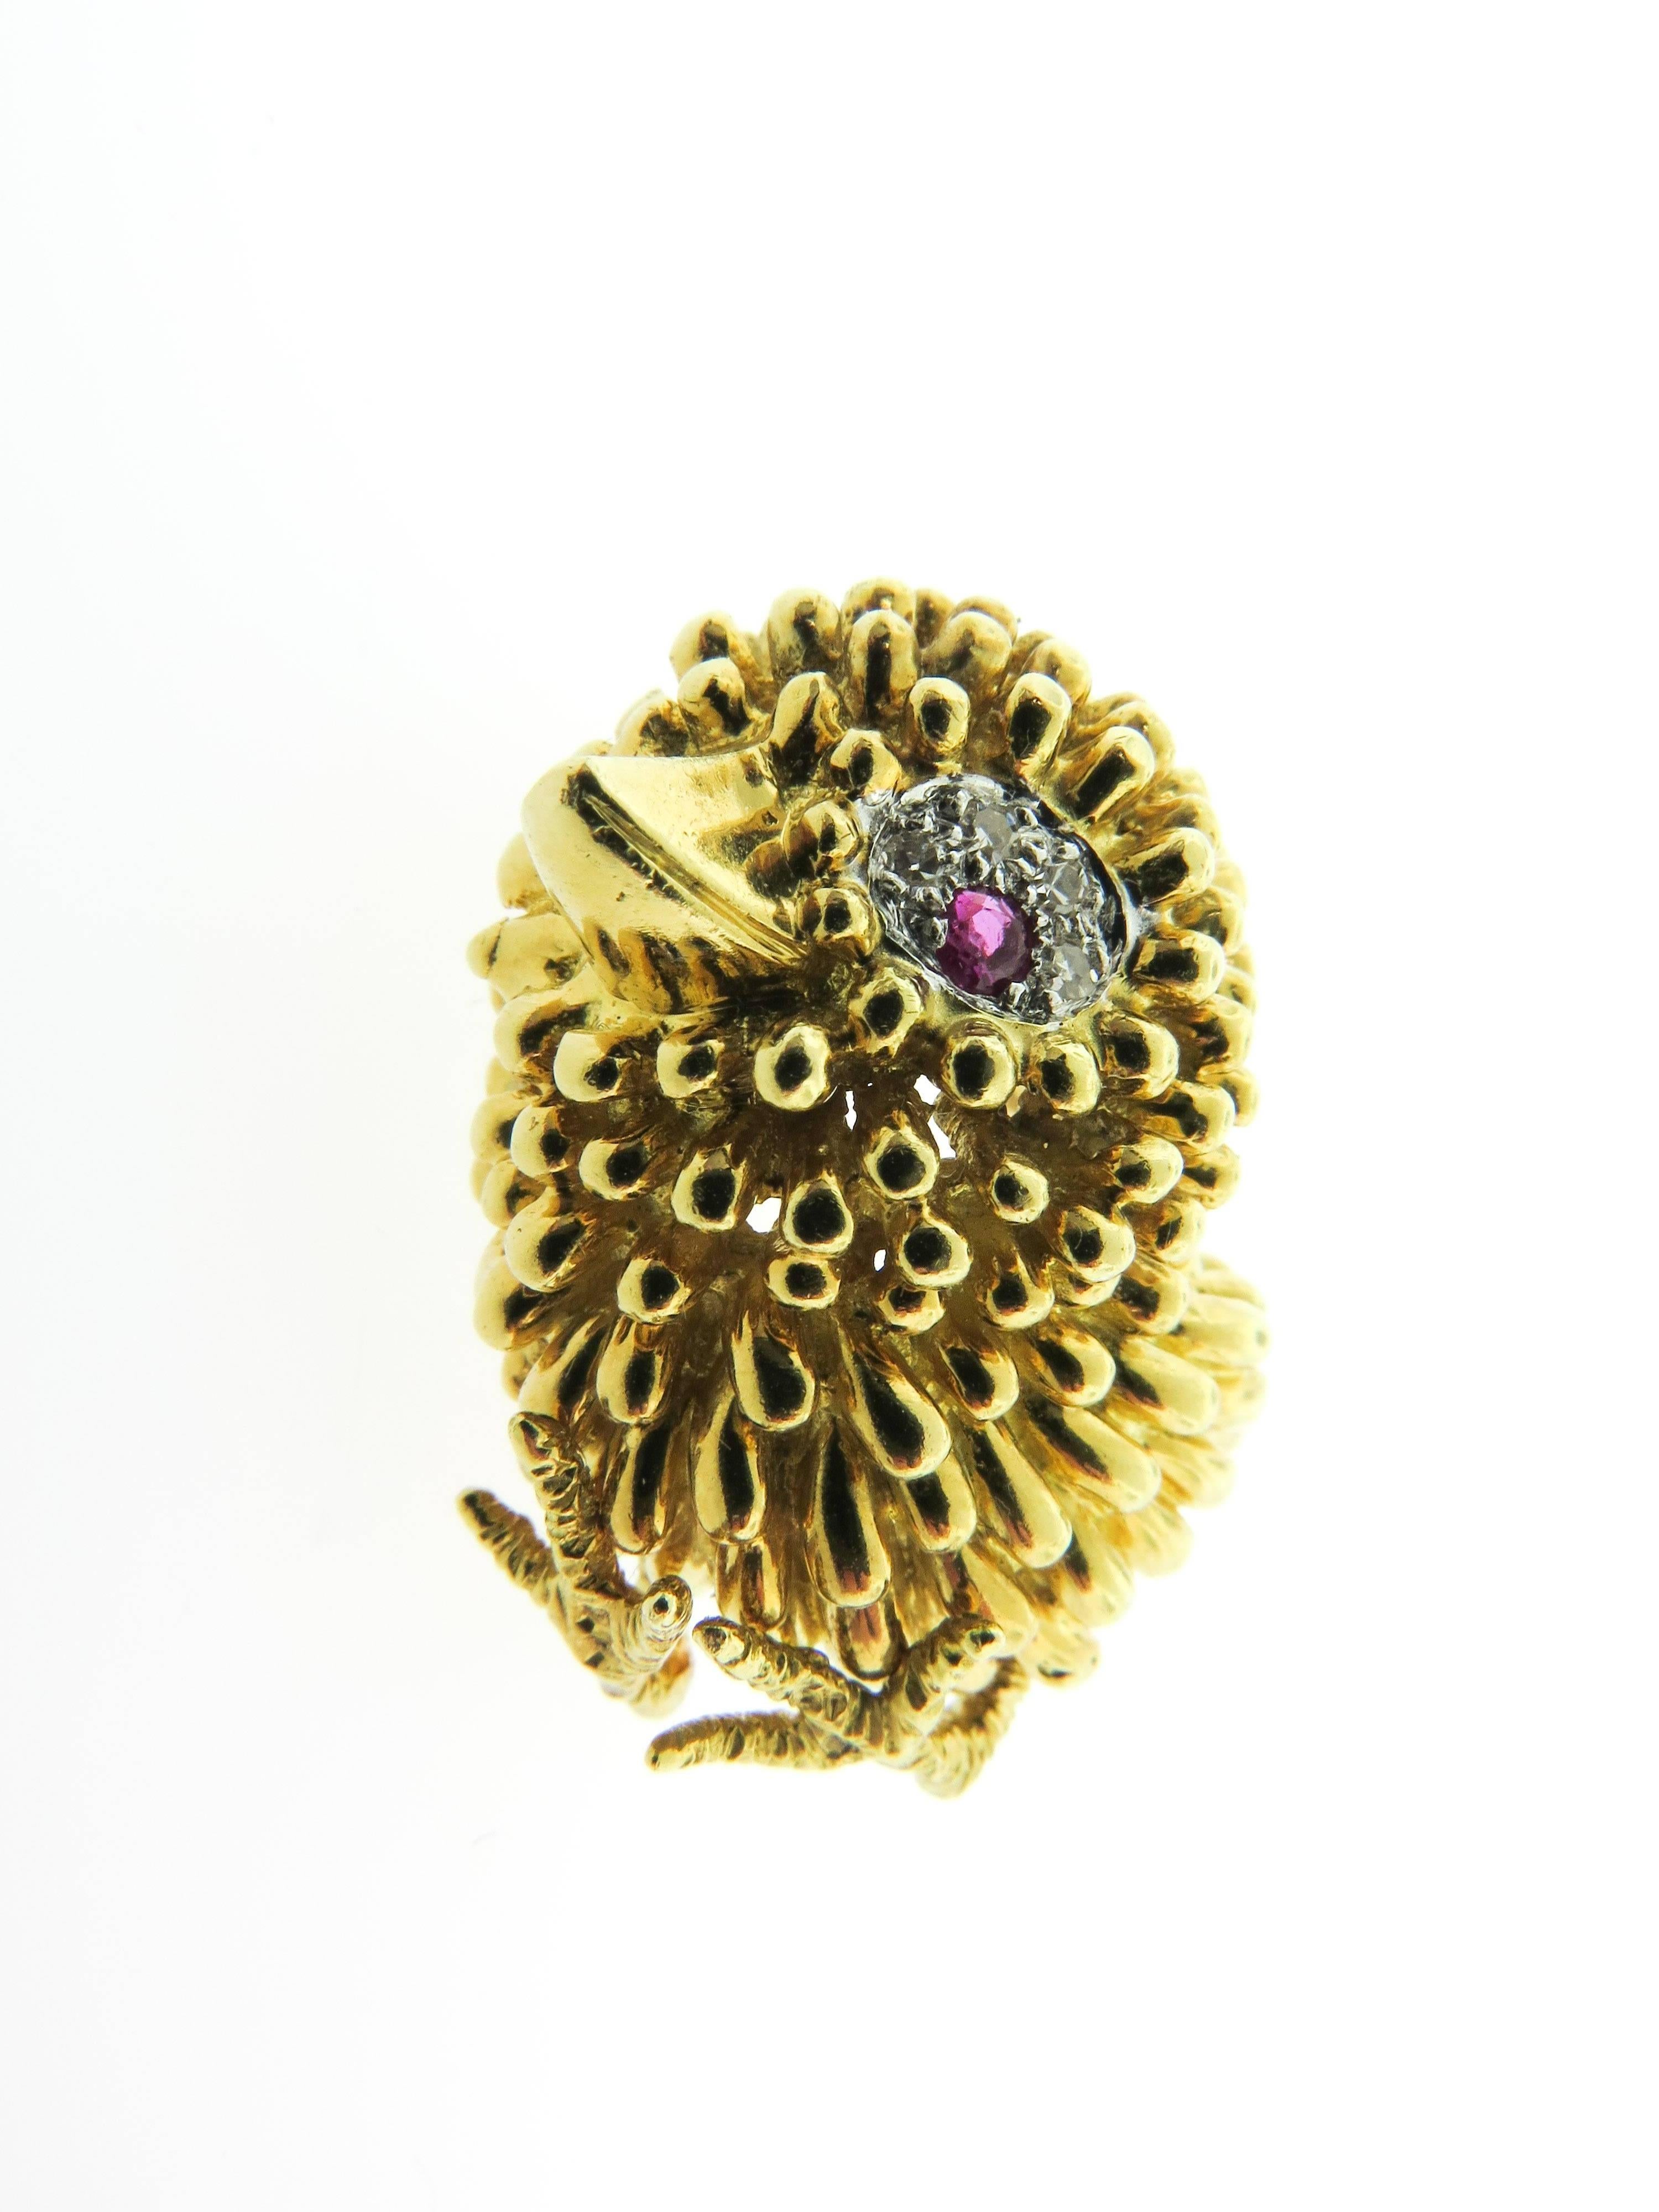 Gold, ruby and diamond baby chick pin, signed by Kutchinsky. 1.3